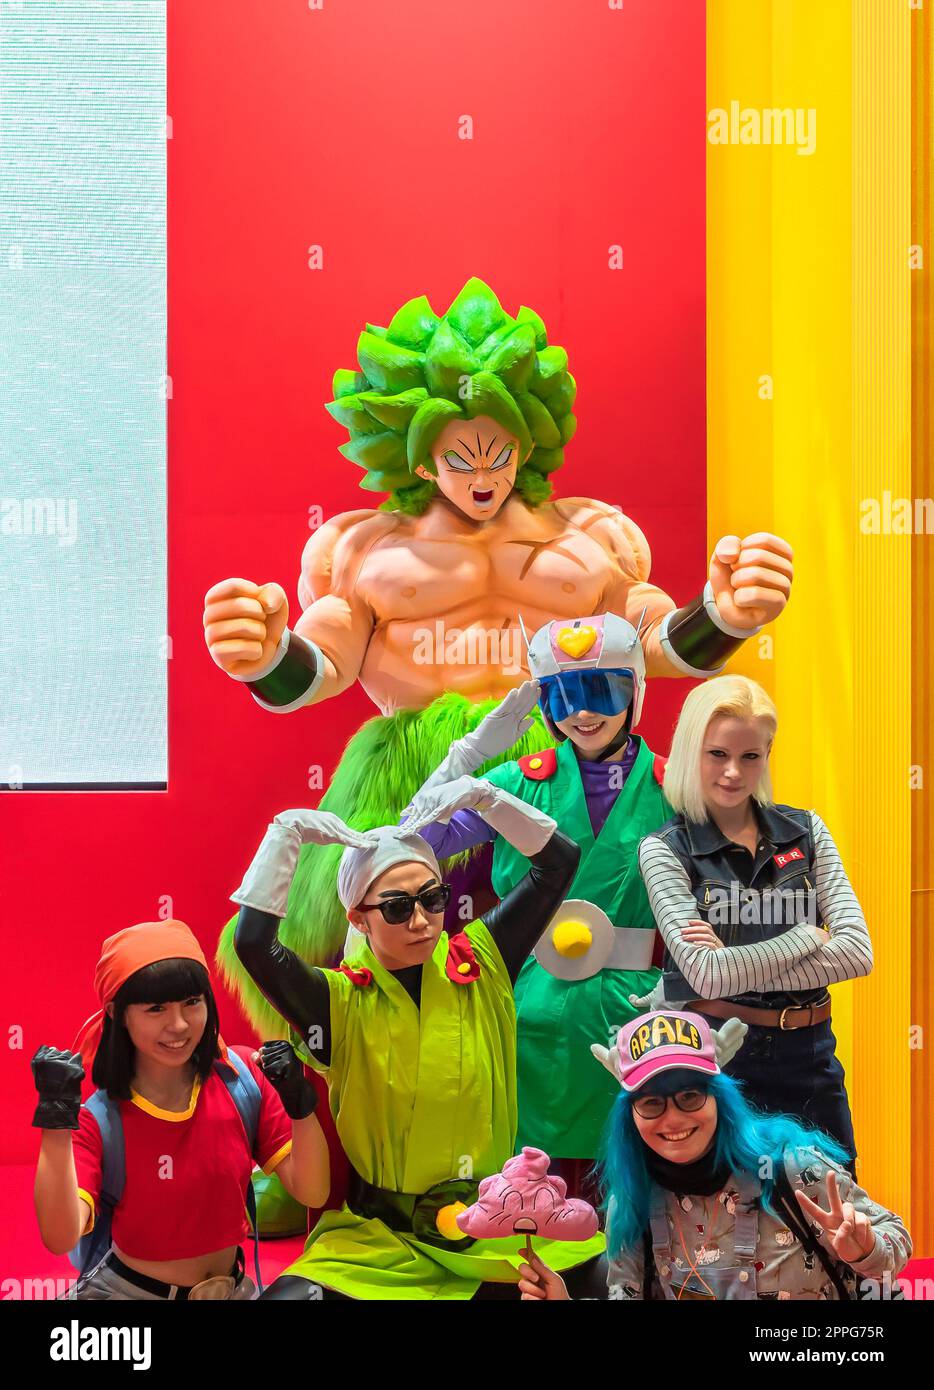 chiba, japan - december 22 2018: Group of young cosplayers wearing costumes and wigs of the characters of the Japanese manga and anime series of Dragon Ball during the convention Jump Festa 19. Stock Photo